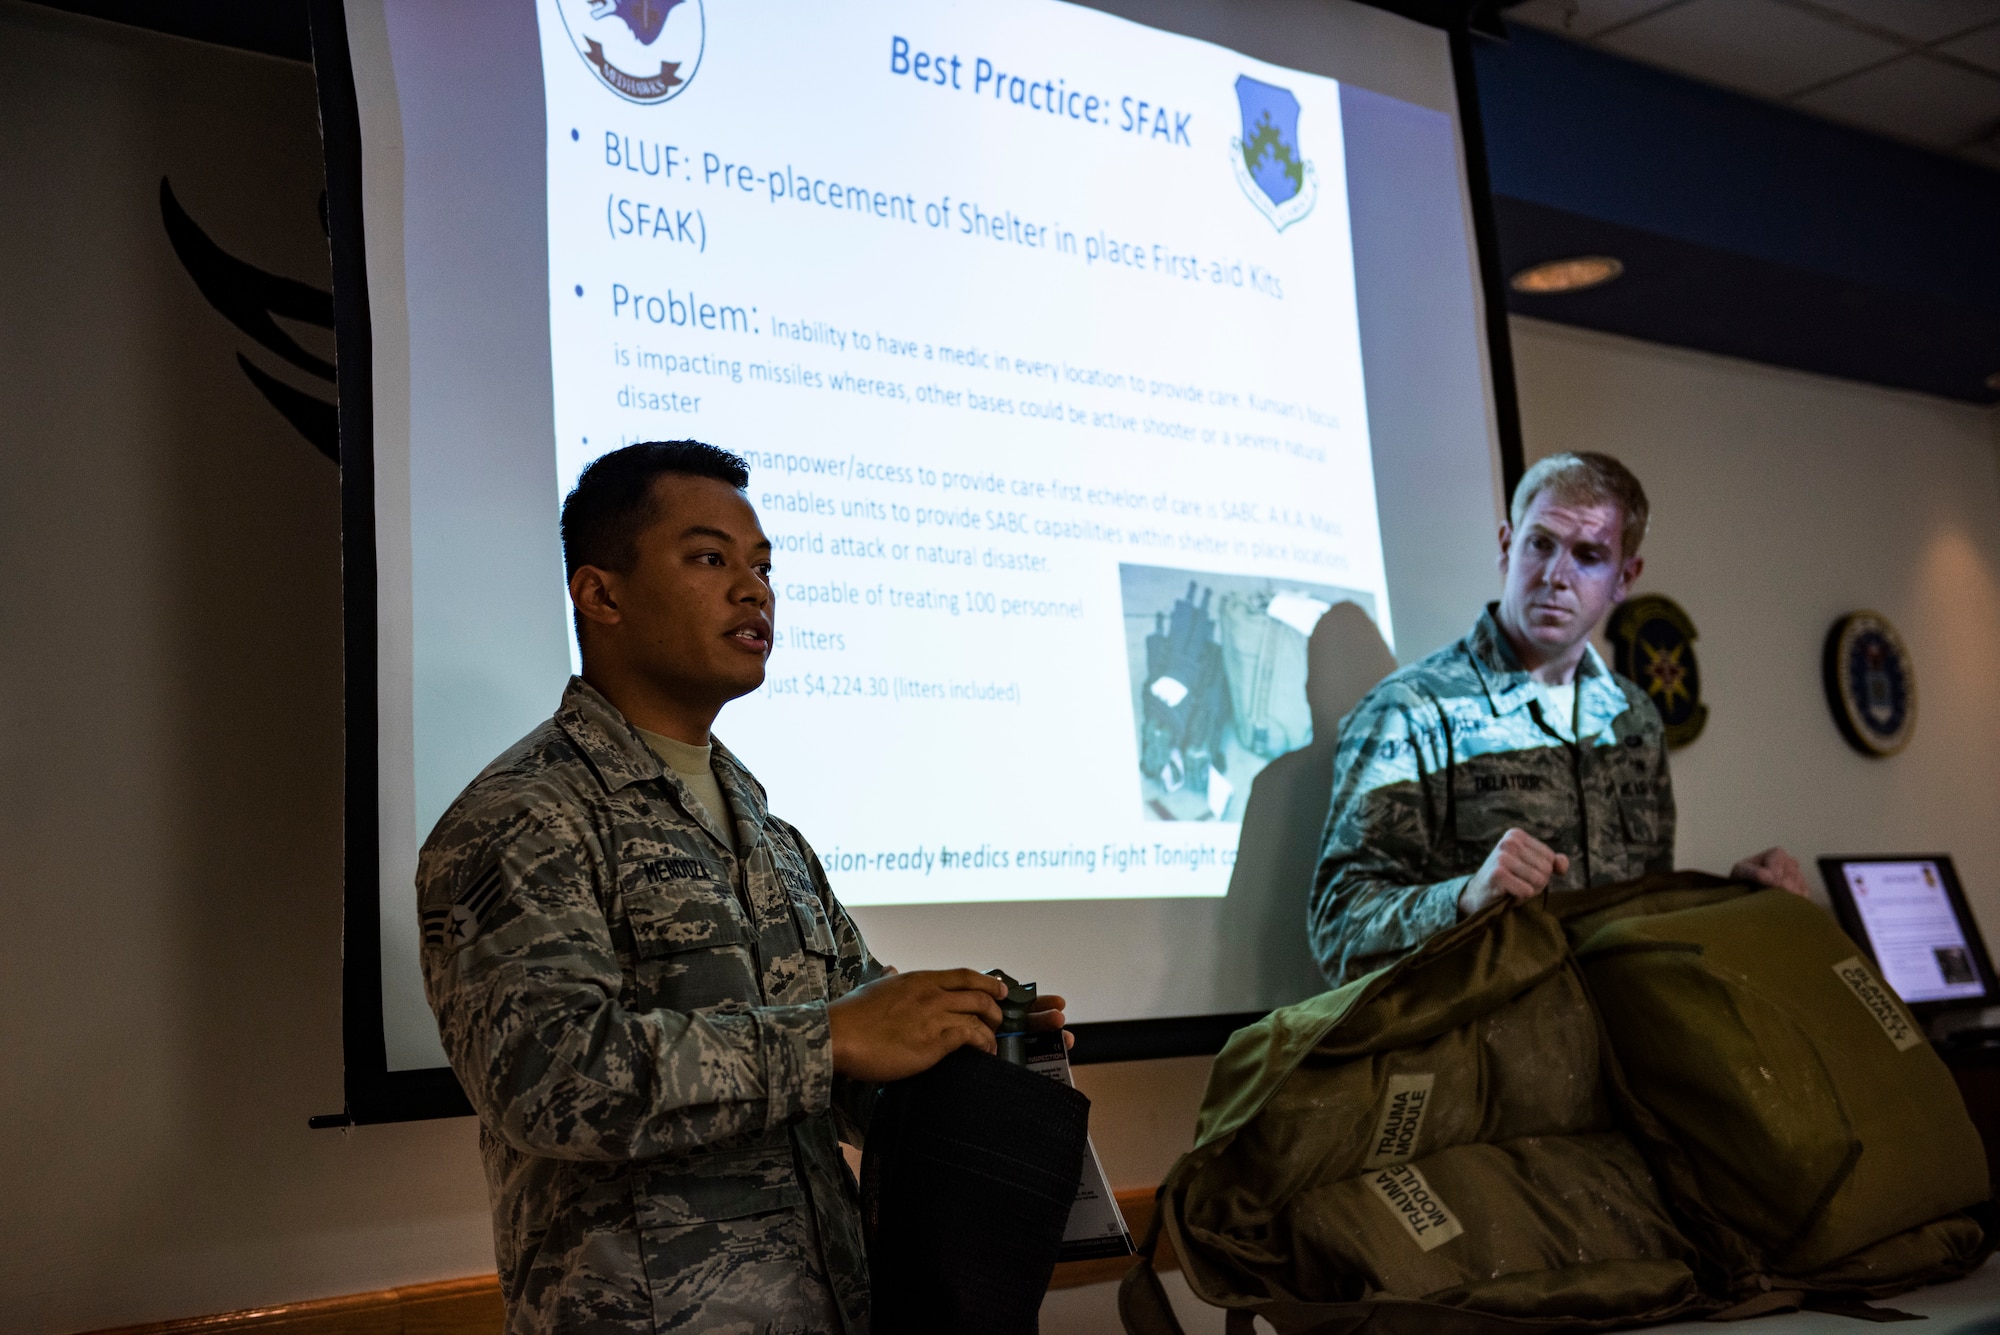 Senior Airman Adam Mendoza, medical materiel technician from the 8th Medical Support Squadron, presents a plan for Shelter-in-place First Aid Kit distribution at Kunsan Air Base, Republic of Korea, Sept. 25, 2018. The SFAK was showcased during the Air Force Surgeon General’s visit to the 8th Medical Group to show it’s importance of being implemented. (U.S. Air Force photo by Senior Airman Stefan Alvarez)